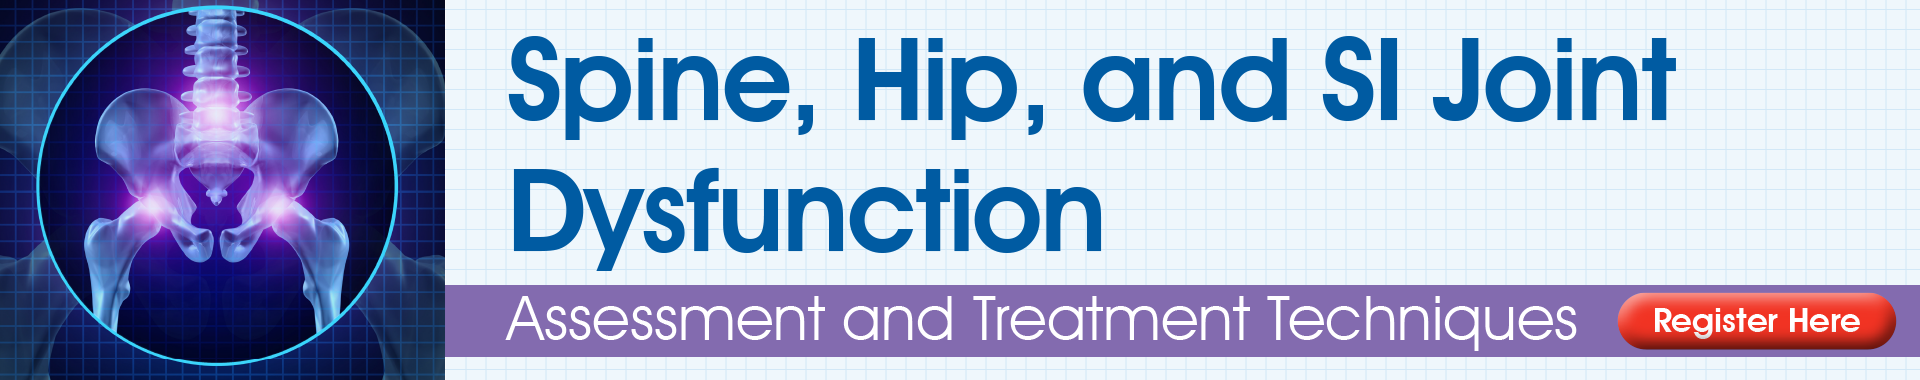 Spine, Hip, and SI Joint Dysfunction: Assessment and Treatment Techniques